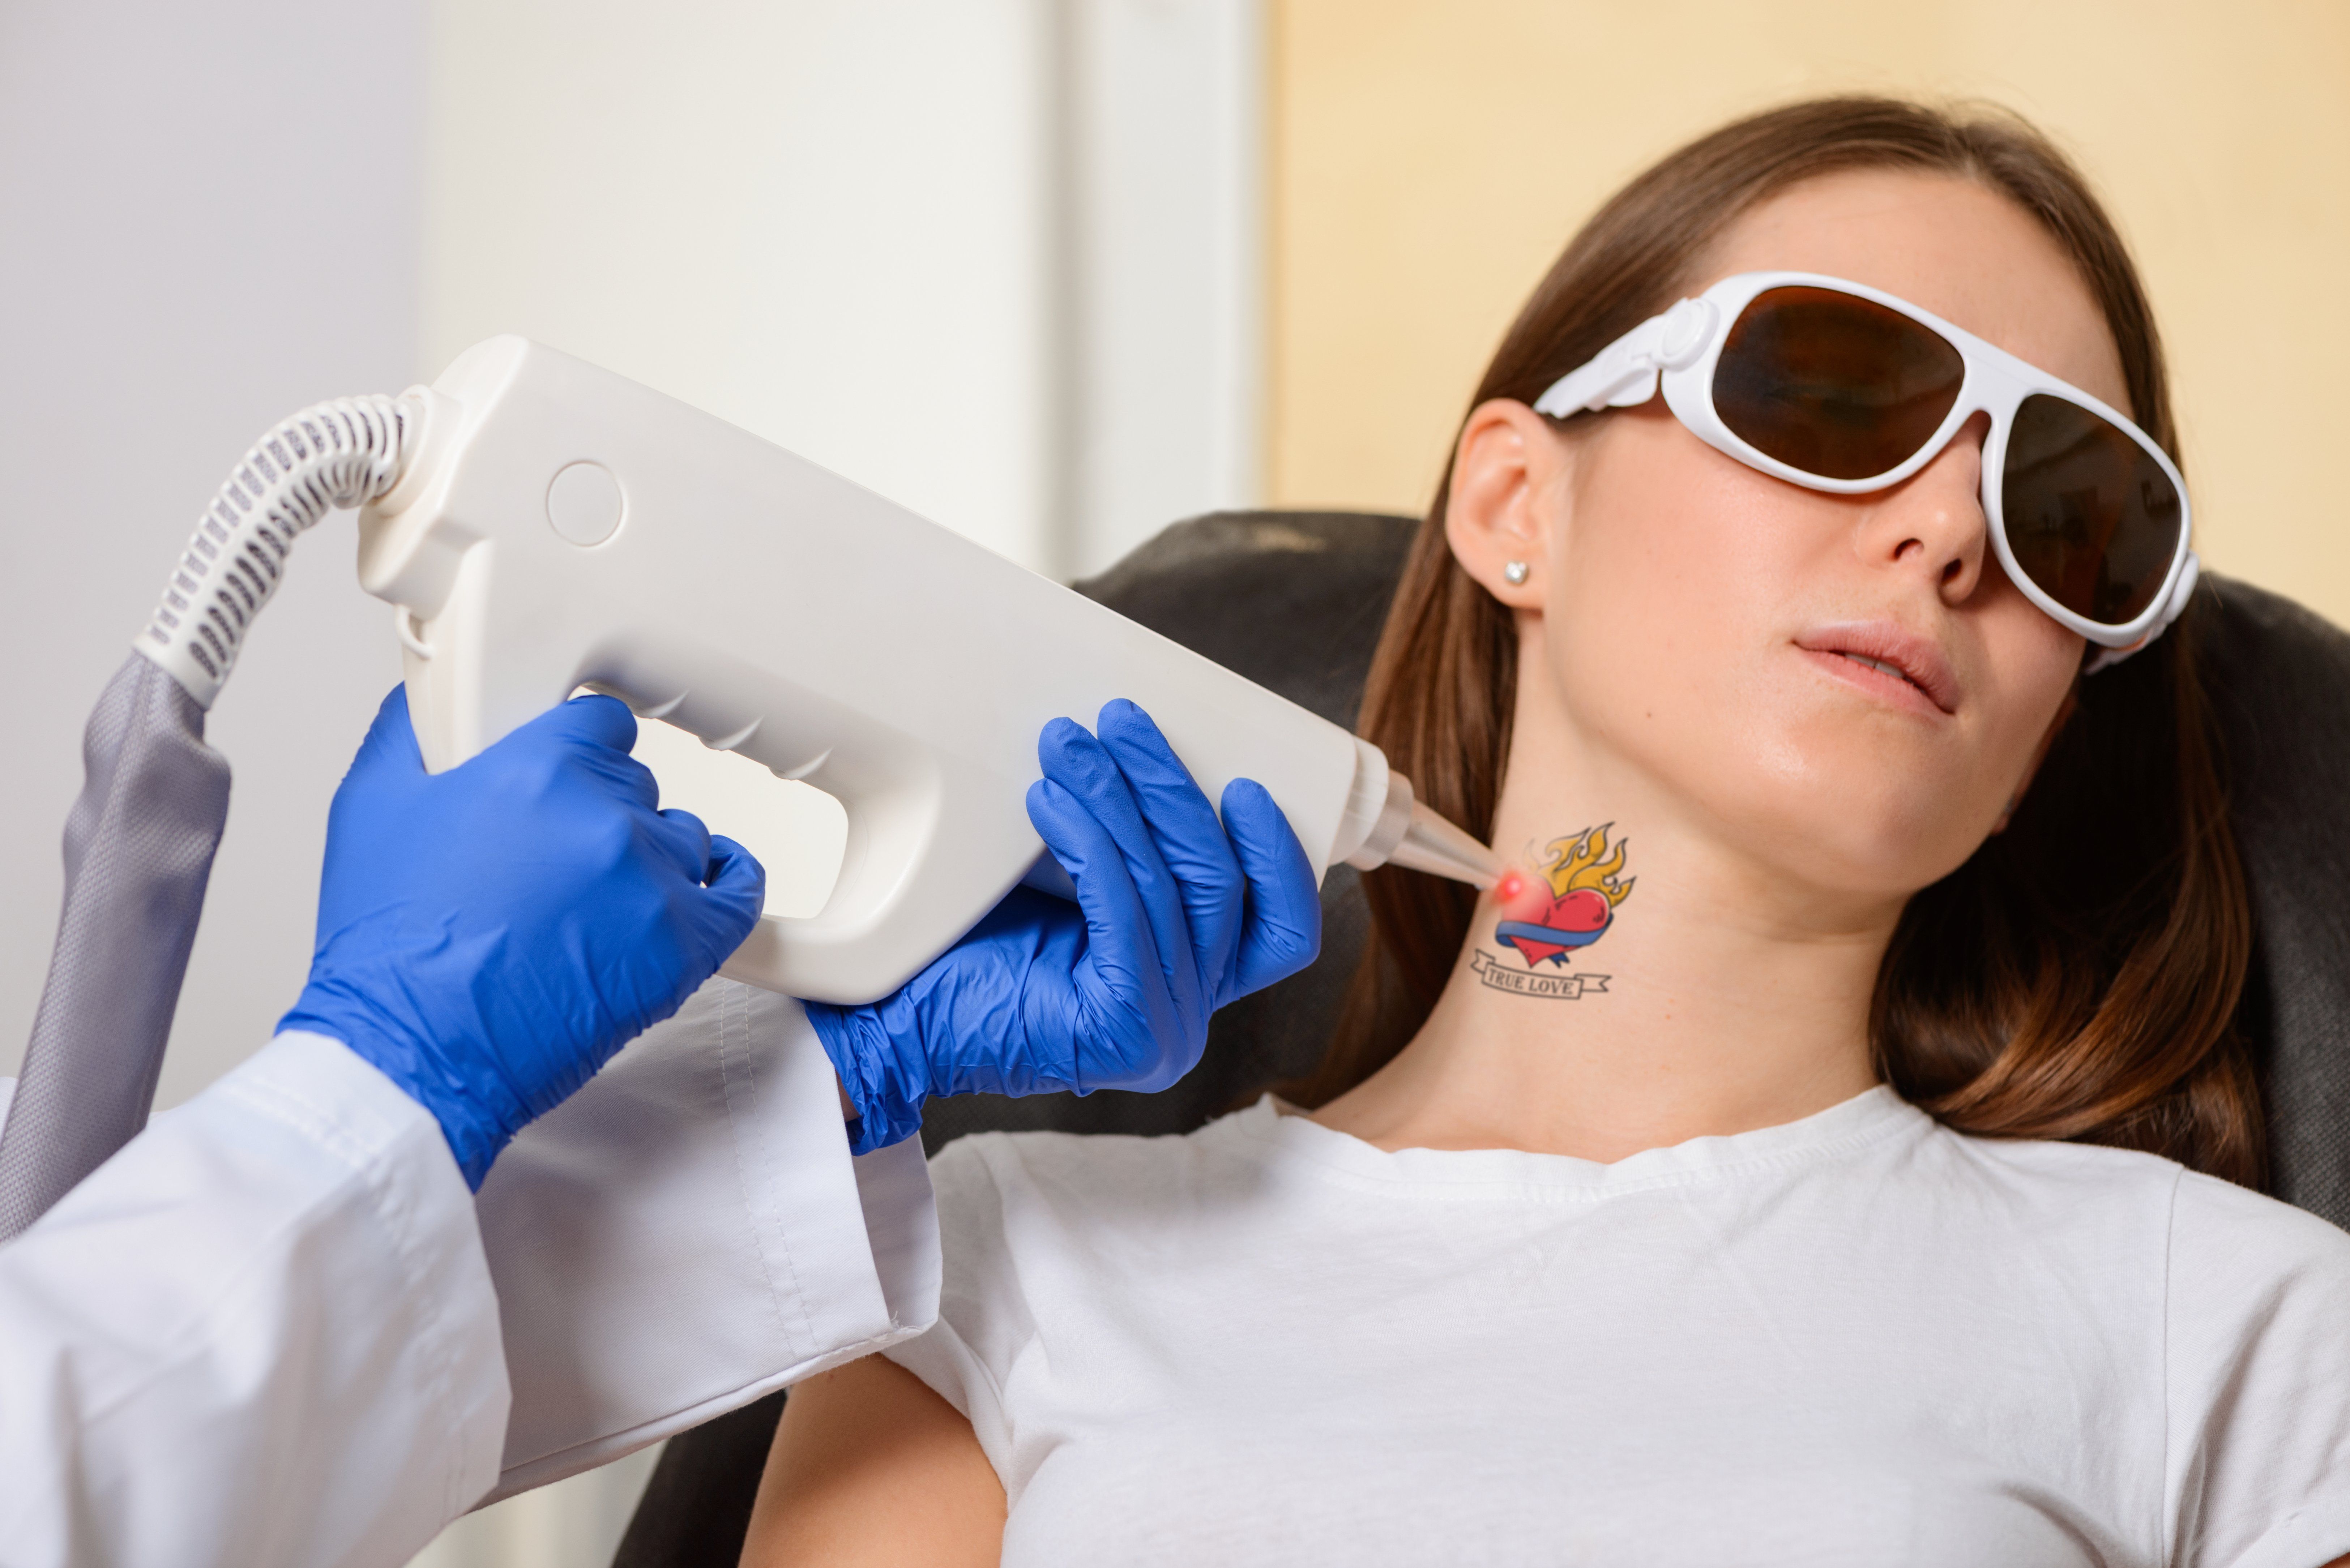 Tips for Managing Pain During Tattoo Removal